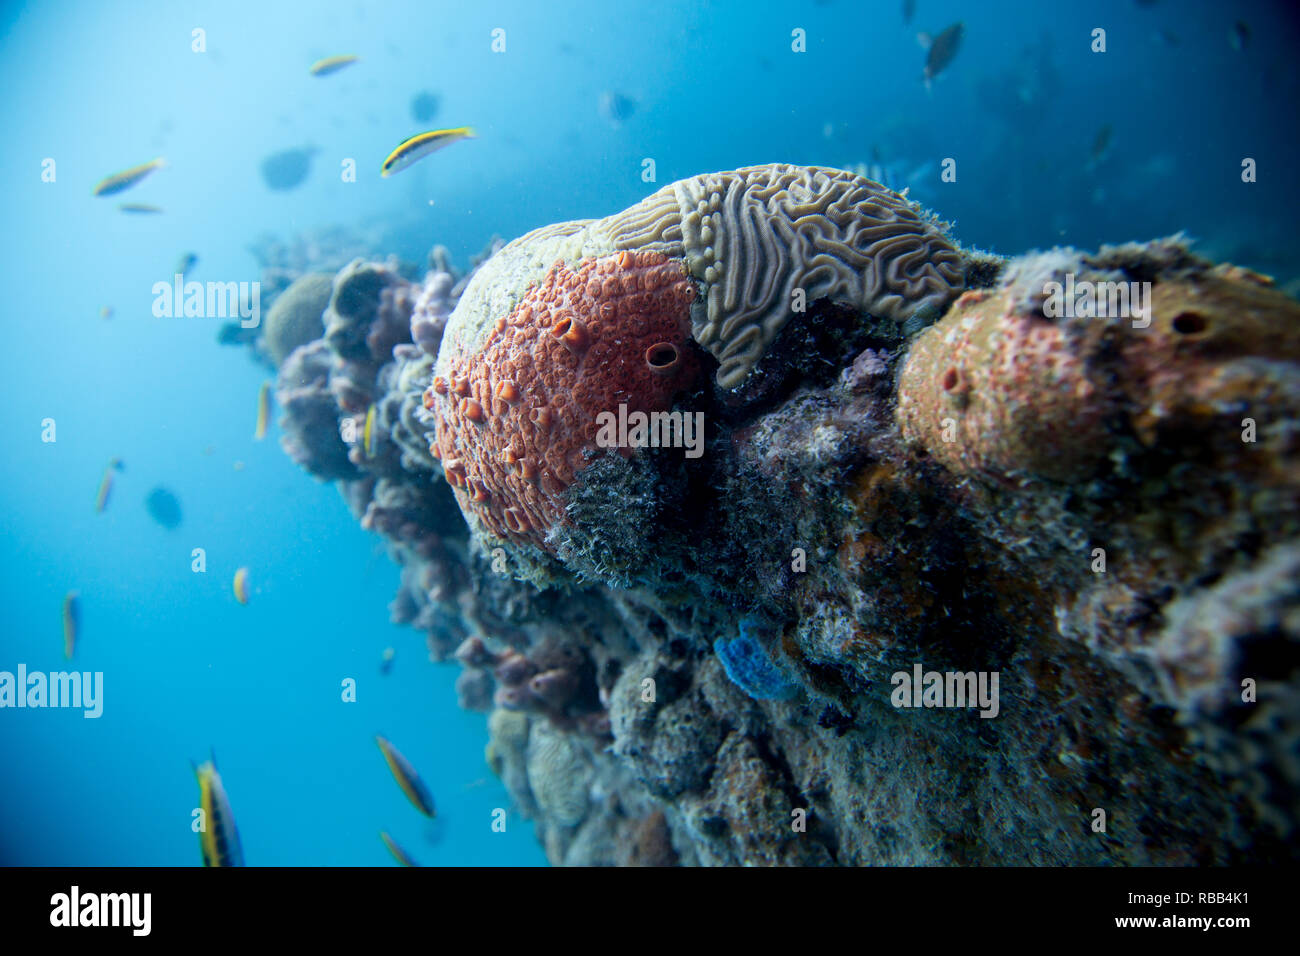 Brain coral grows on a coral reef in Barbados Stock Photo